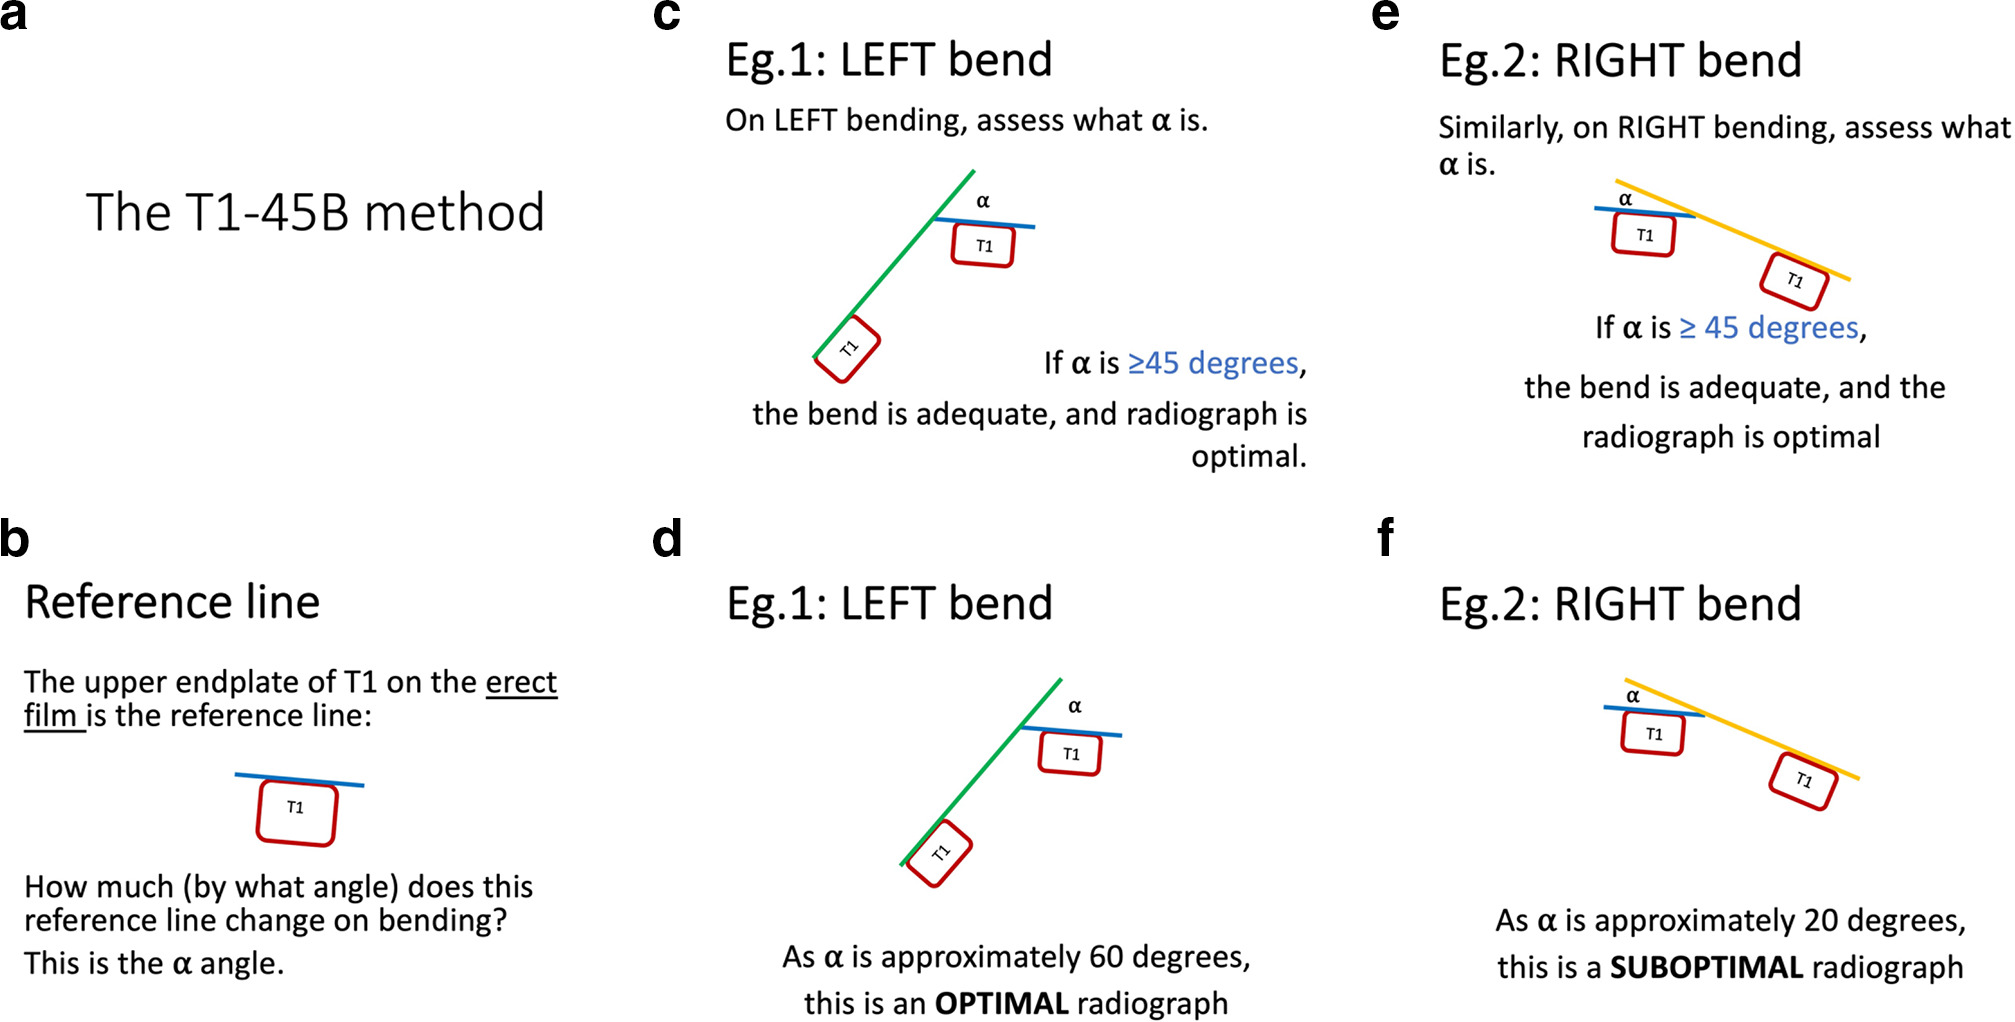 Fig. 1 
            a) and b) The reference line used in the T1-45B method. c) and d) An adequate left bend effort and optimal study. e) and f) An inadequate right bend effort and suboptimal study.
          